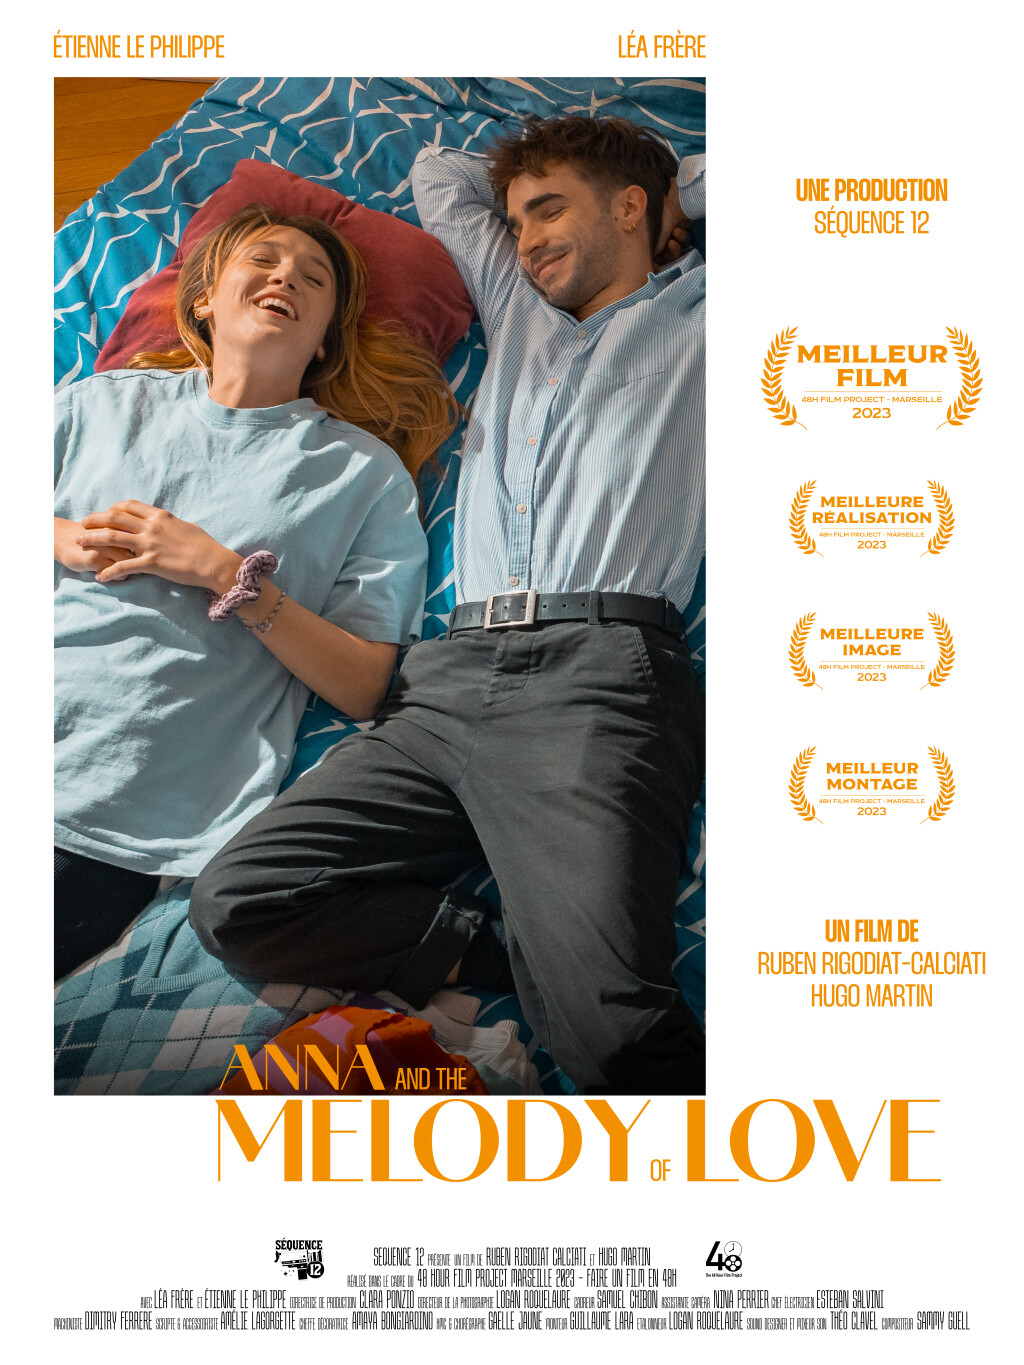 Filmposter for ANNA AND THE MELODY OF LOVE